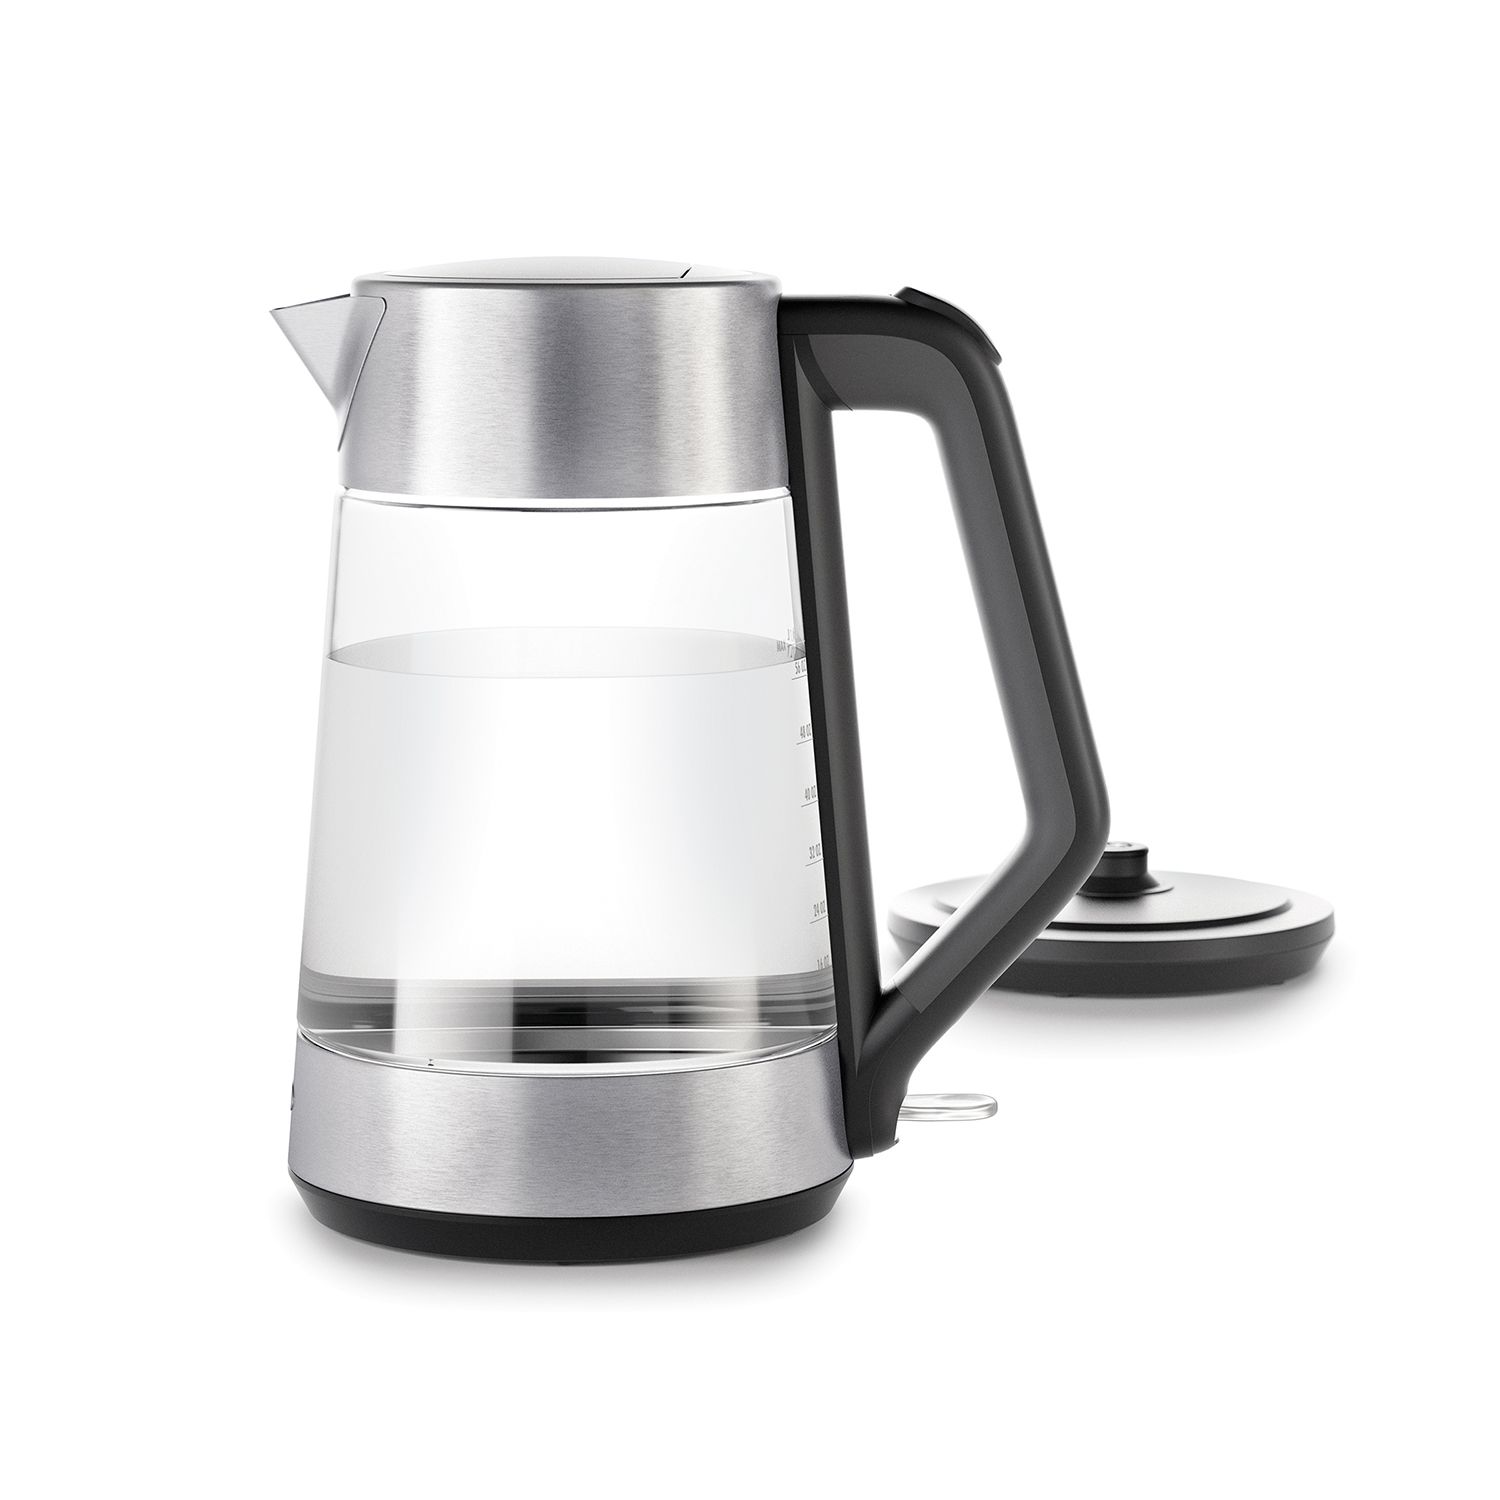 oxo electric kettle review